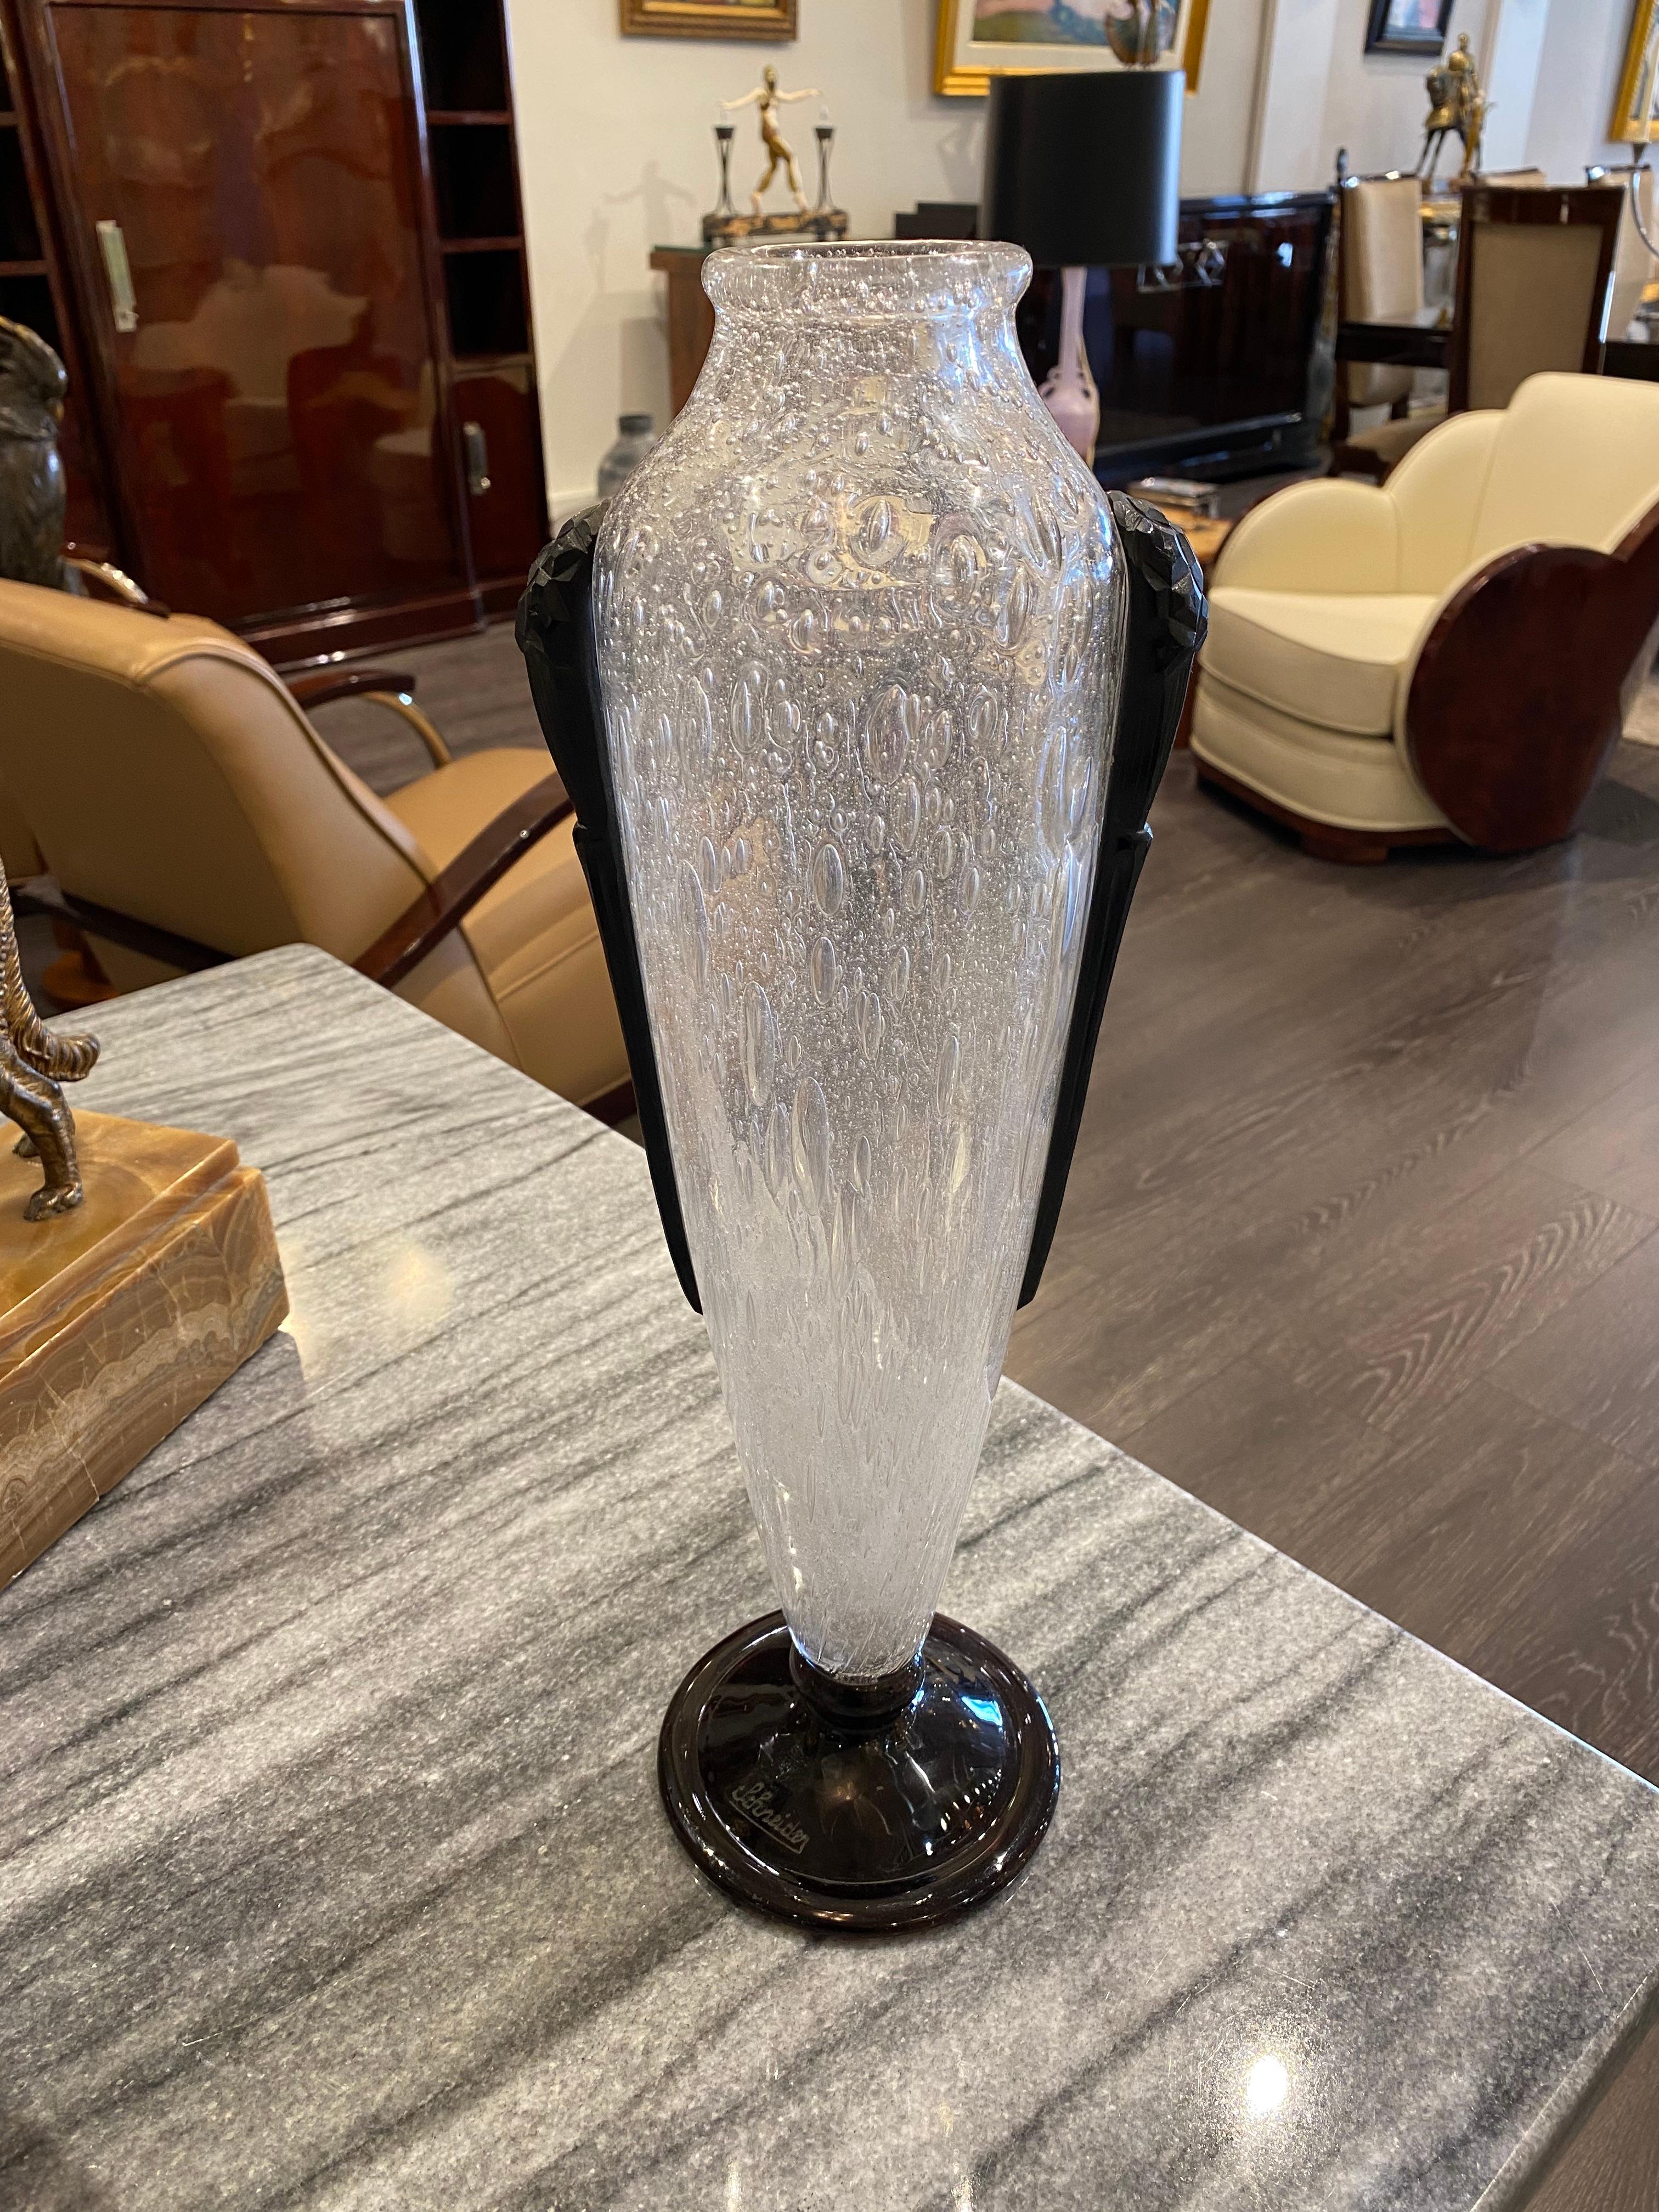 A cylindrical-shaped vase in Clear bubbled glass with wheel-carved Black glass handles/side applications.  This piece belongs to the Pluviose serie from Charles Schneider.
Signature: Schneider

This piece can be found on page 320 in the book of